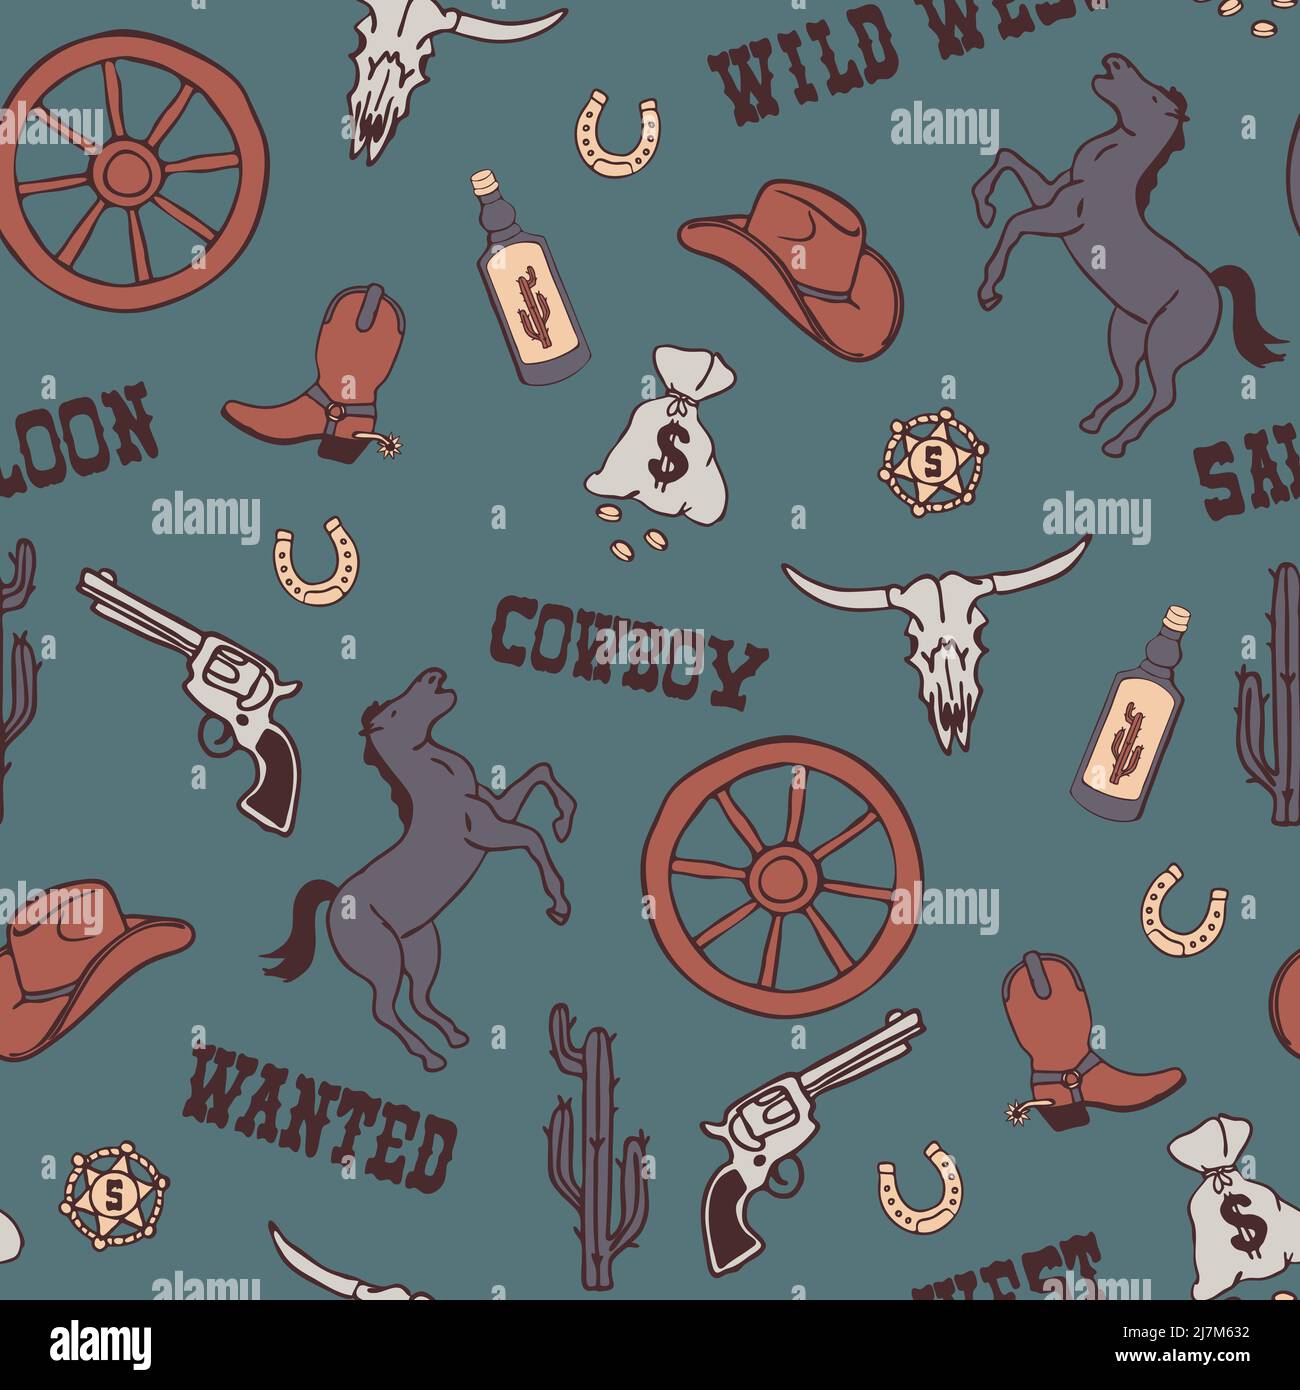 Seamless vector pattern with wild west cowboy on teal blue background. Simple hand drawn western wallpaper design. Decorative Texas fashion textile. Stock Vector